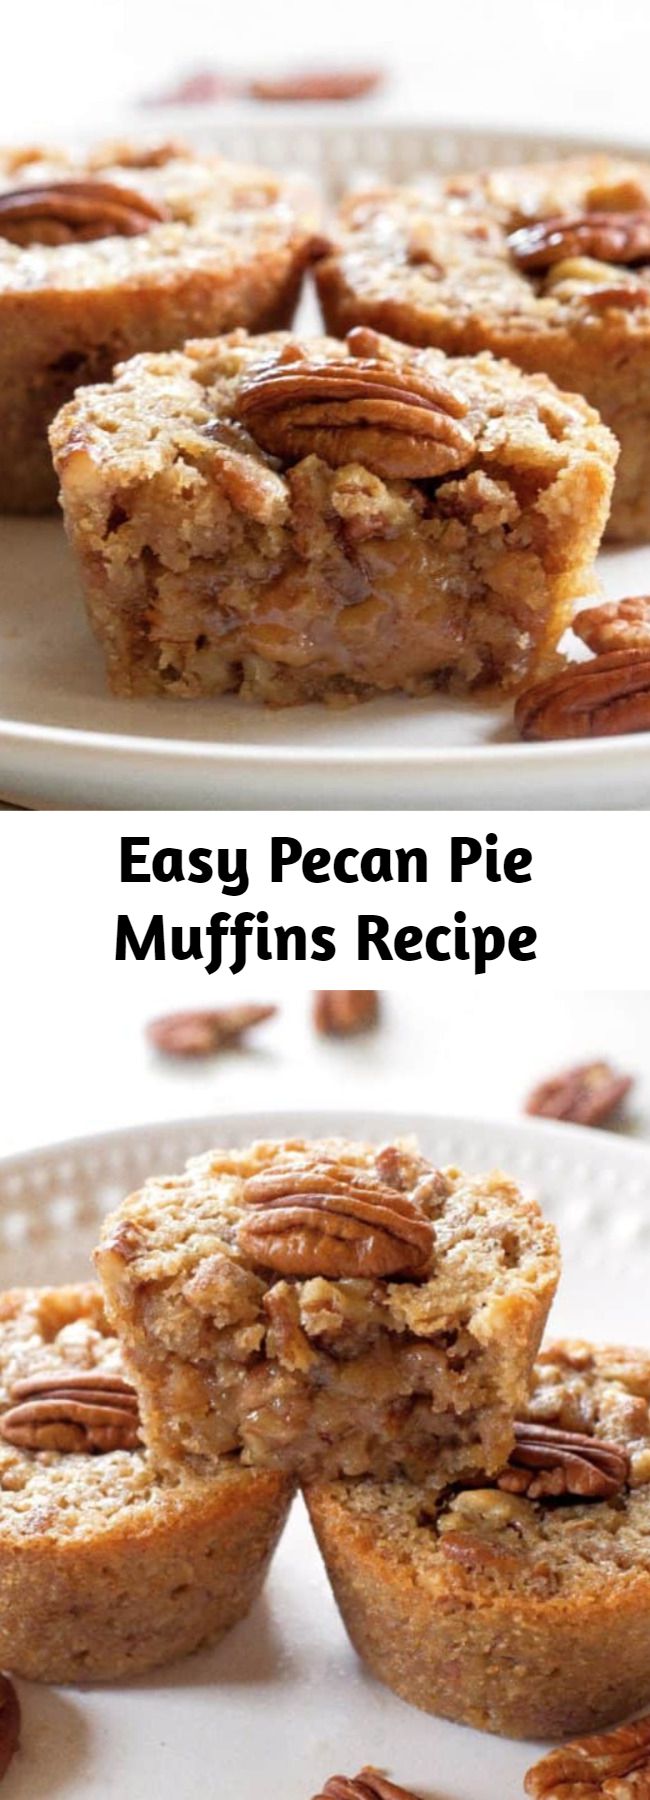 Easy Pecan Pie Muffins Recipe - These Pecan Pie Muffins are a mix between a pie and a muffin. They have a muffin texture with a soft gooey inside like a mini Southern pecan pie. This recipe is one of the highest used recipes during the fall especially for Thanksgiving!